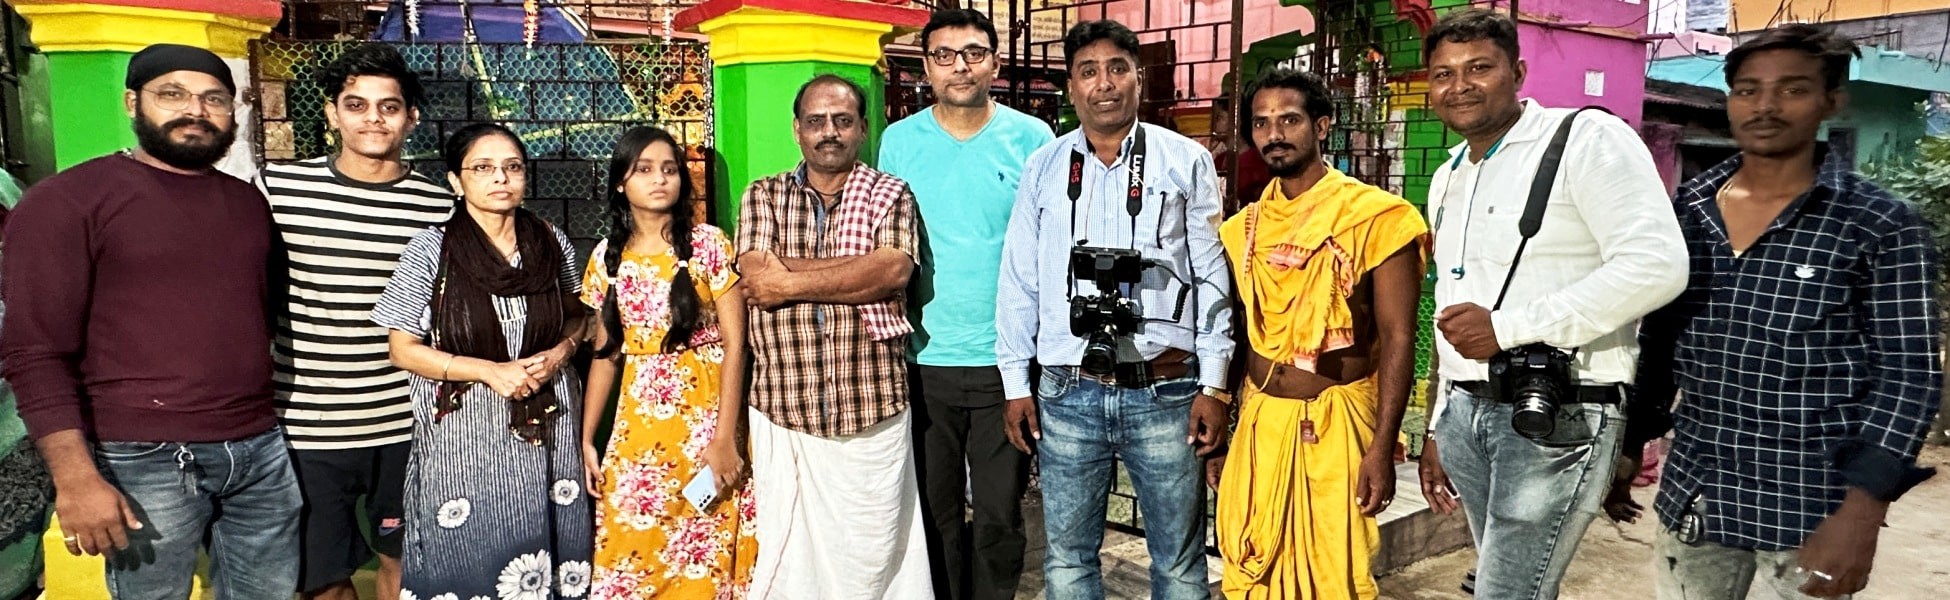 short film production house in india, short film production house in odisha, short film production house in puri, short film production company in india, short film production company in odisha, short film production company in puri